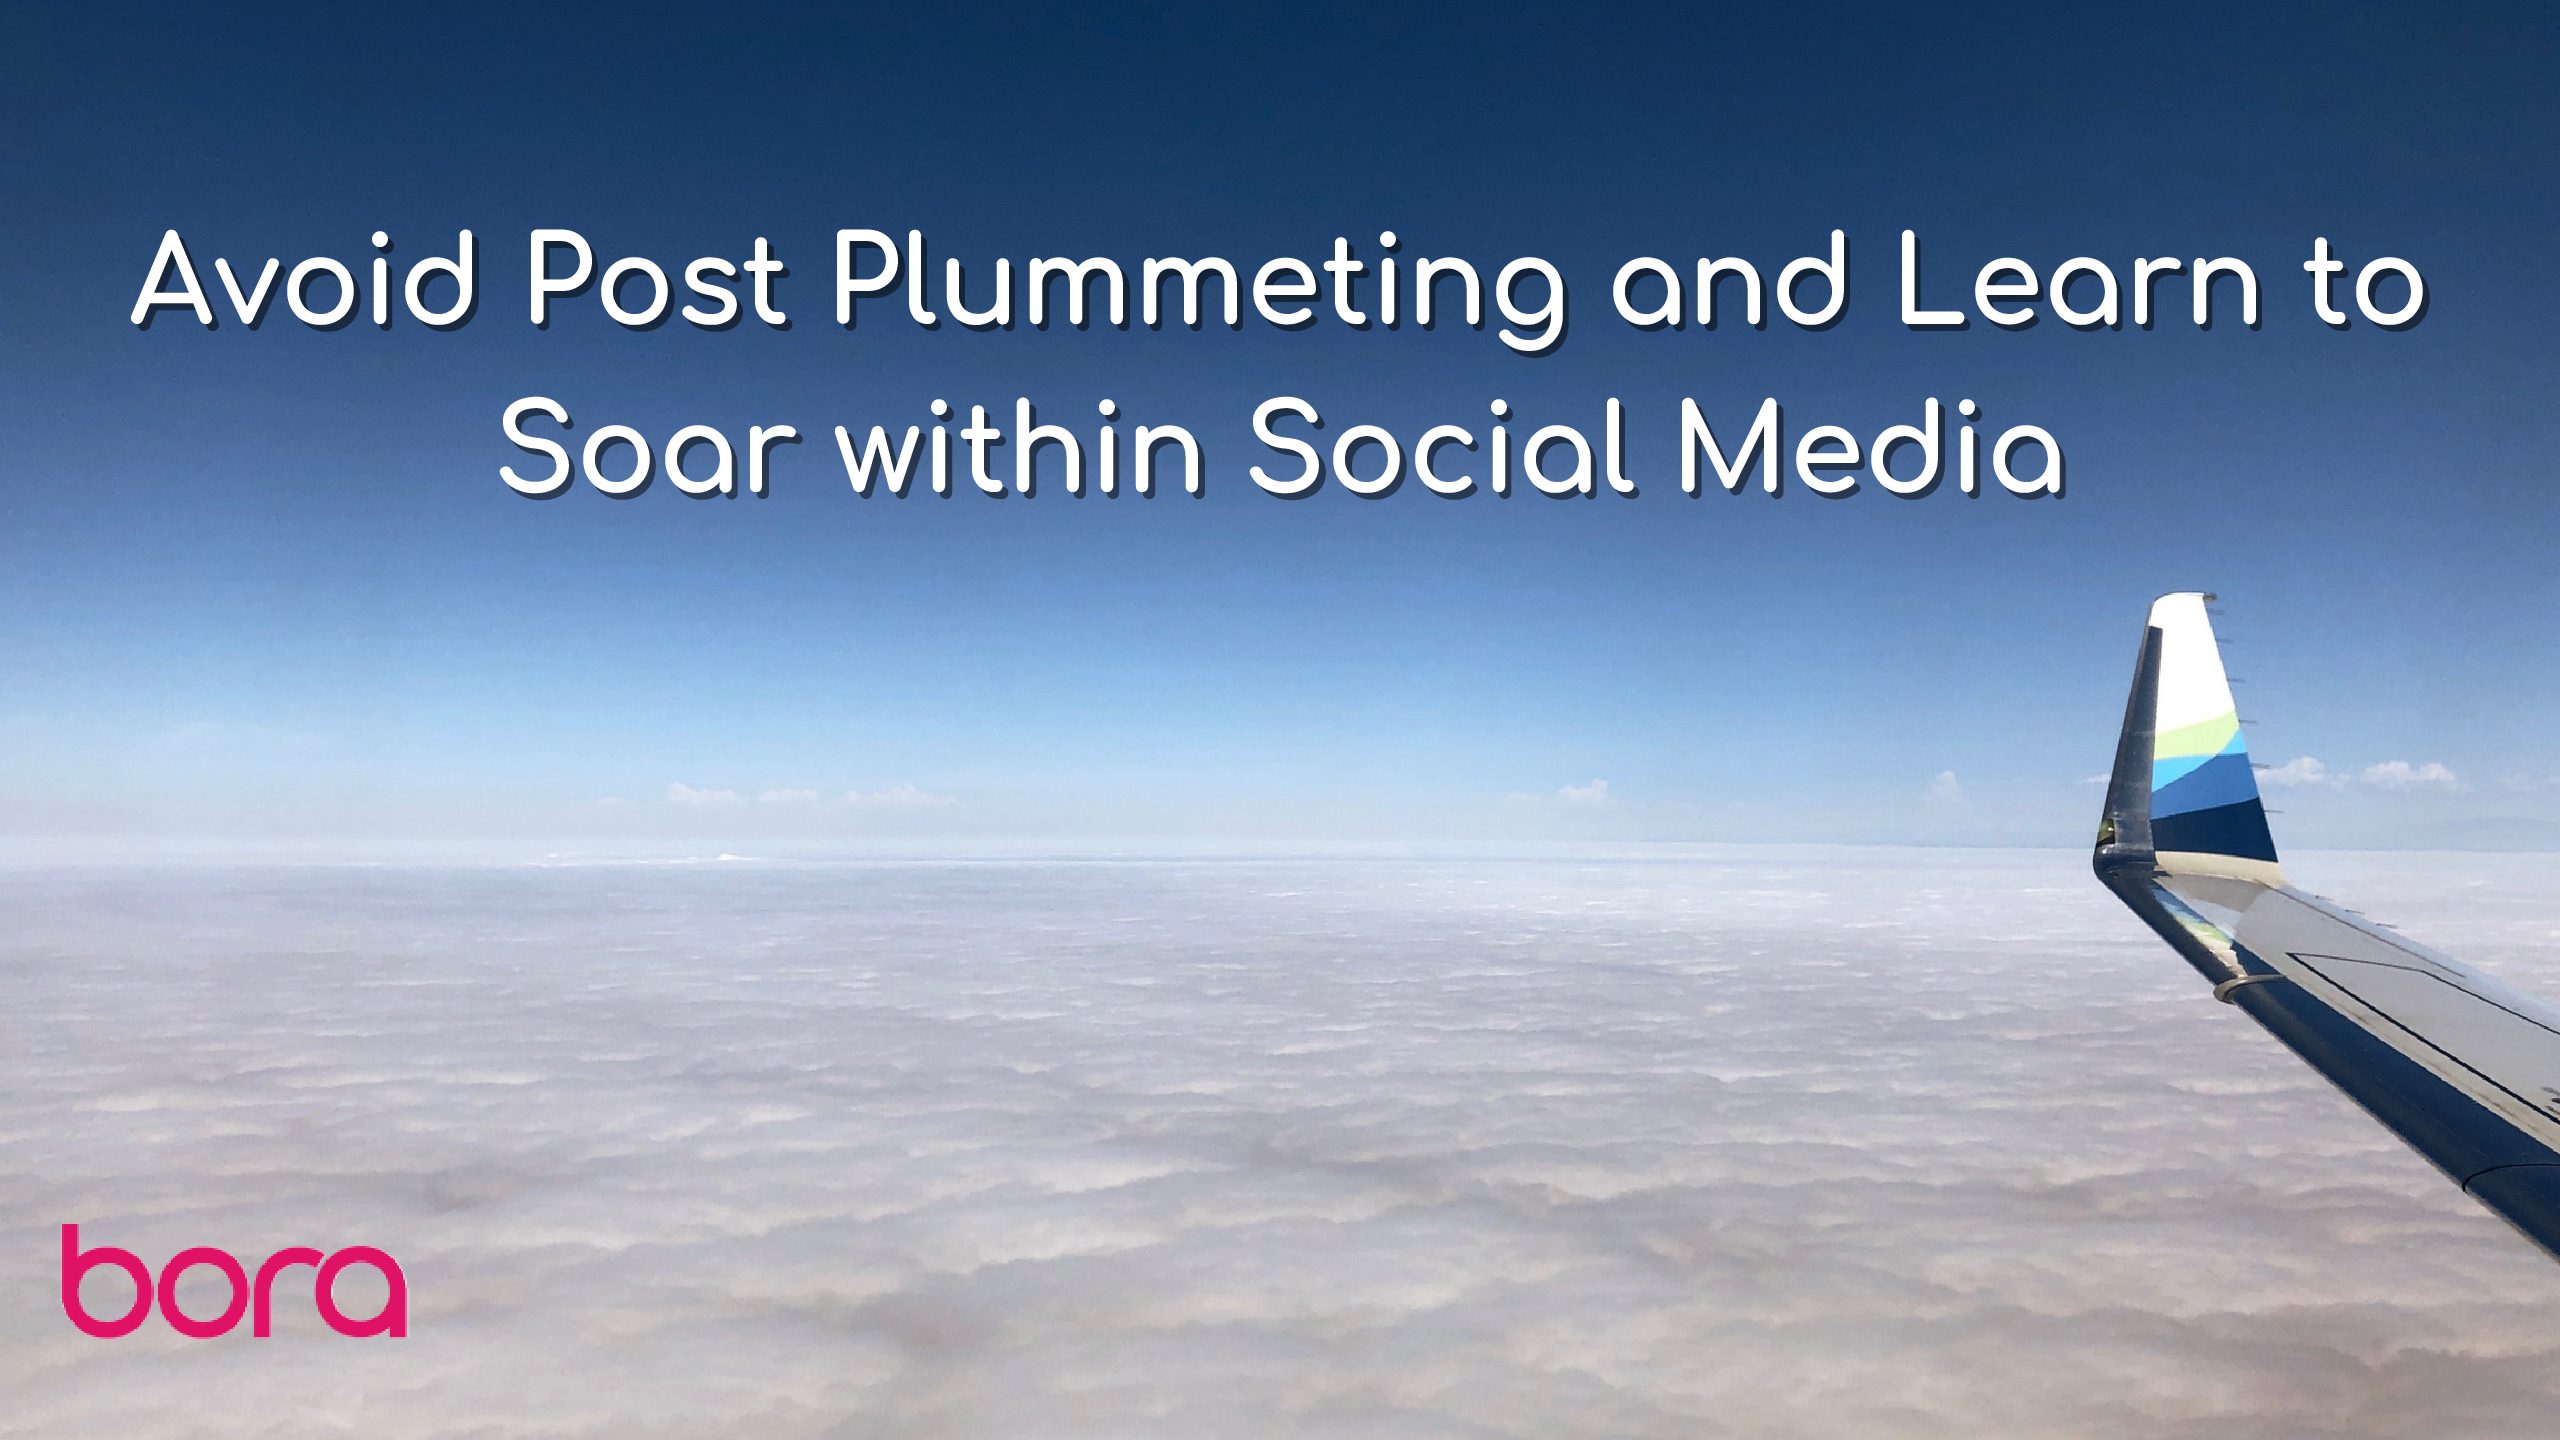 Avoid Post Plummeting and Learn to Soar within Social Media